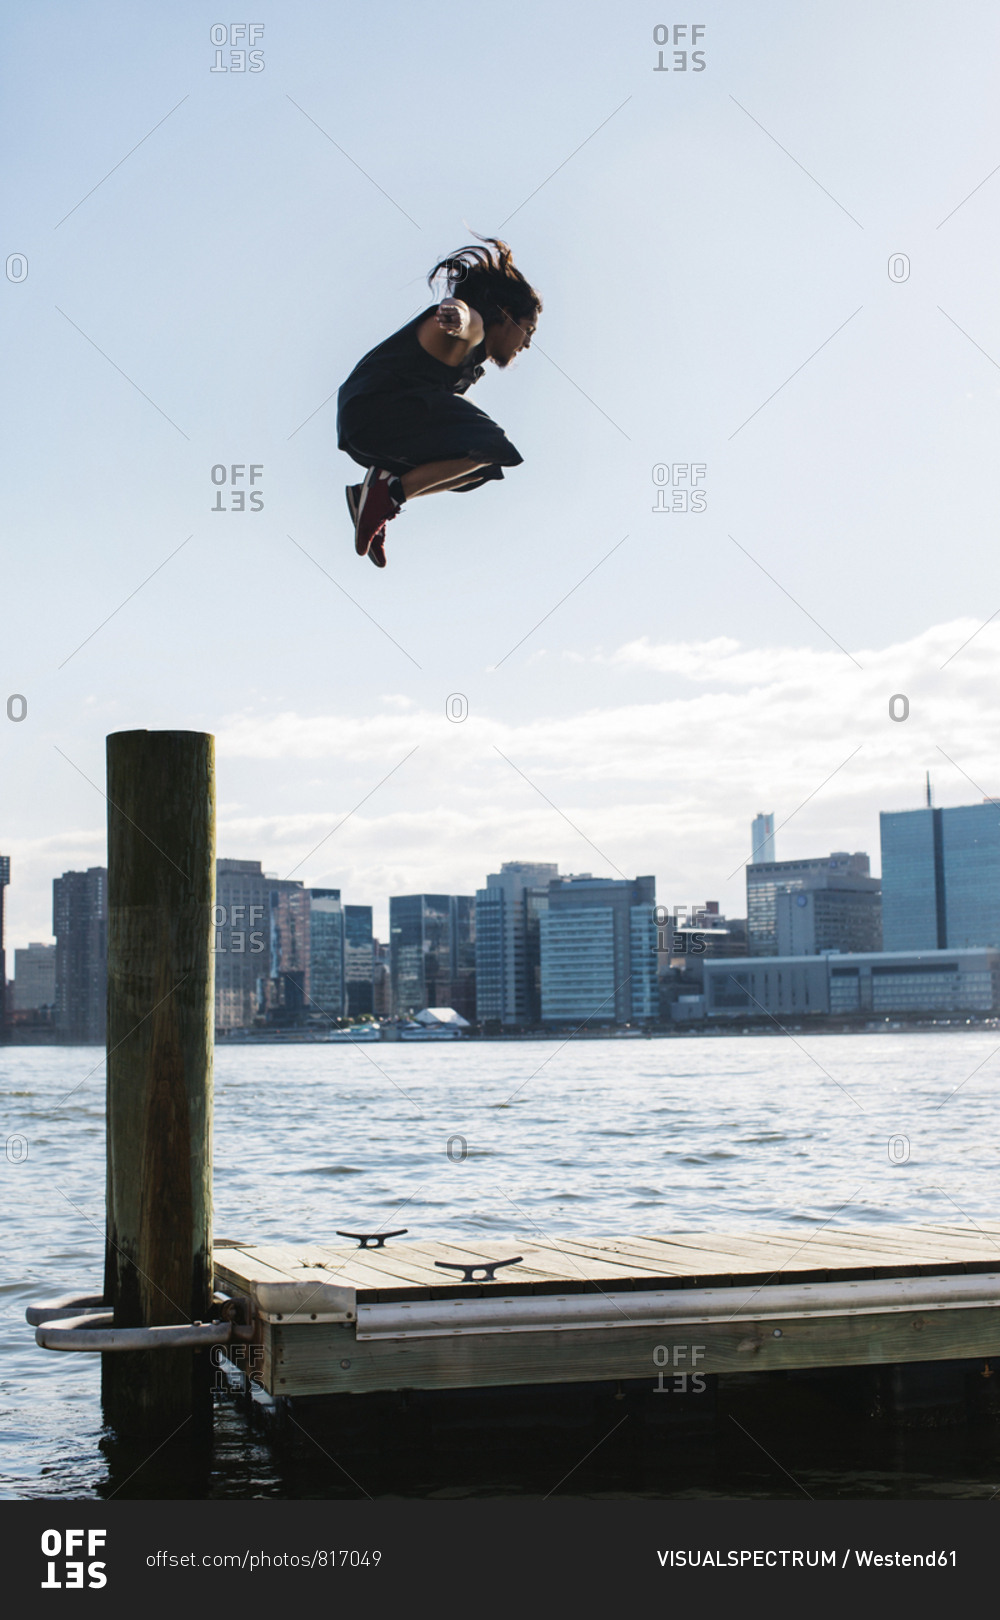 USA- New York- Brooklyn- young man doing Parkour jump from wooden pole in front of Manhattan skyline